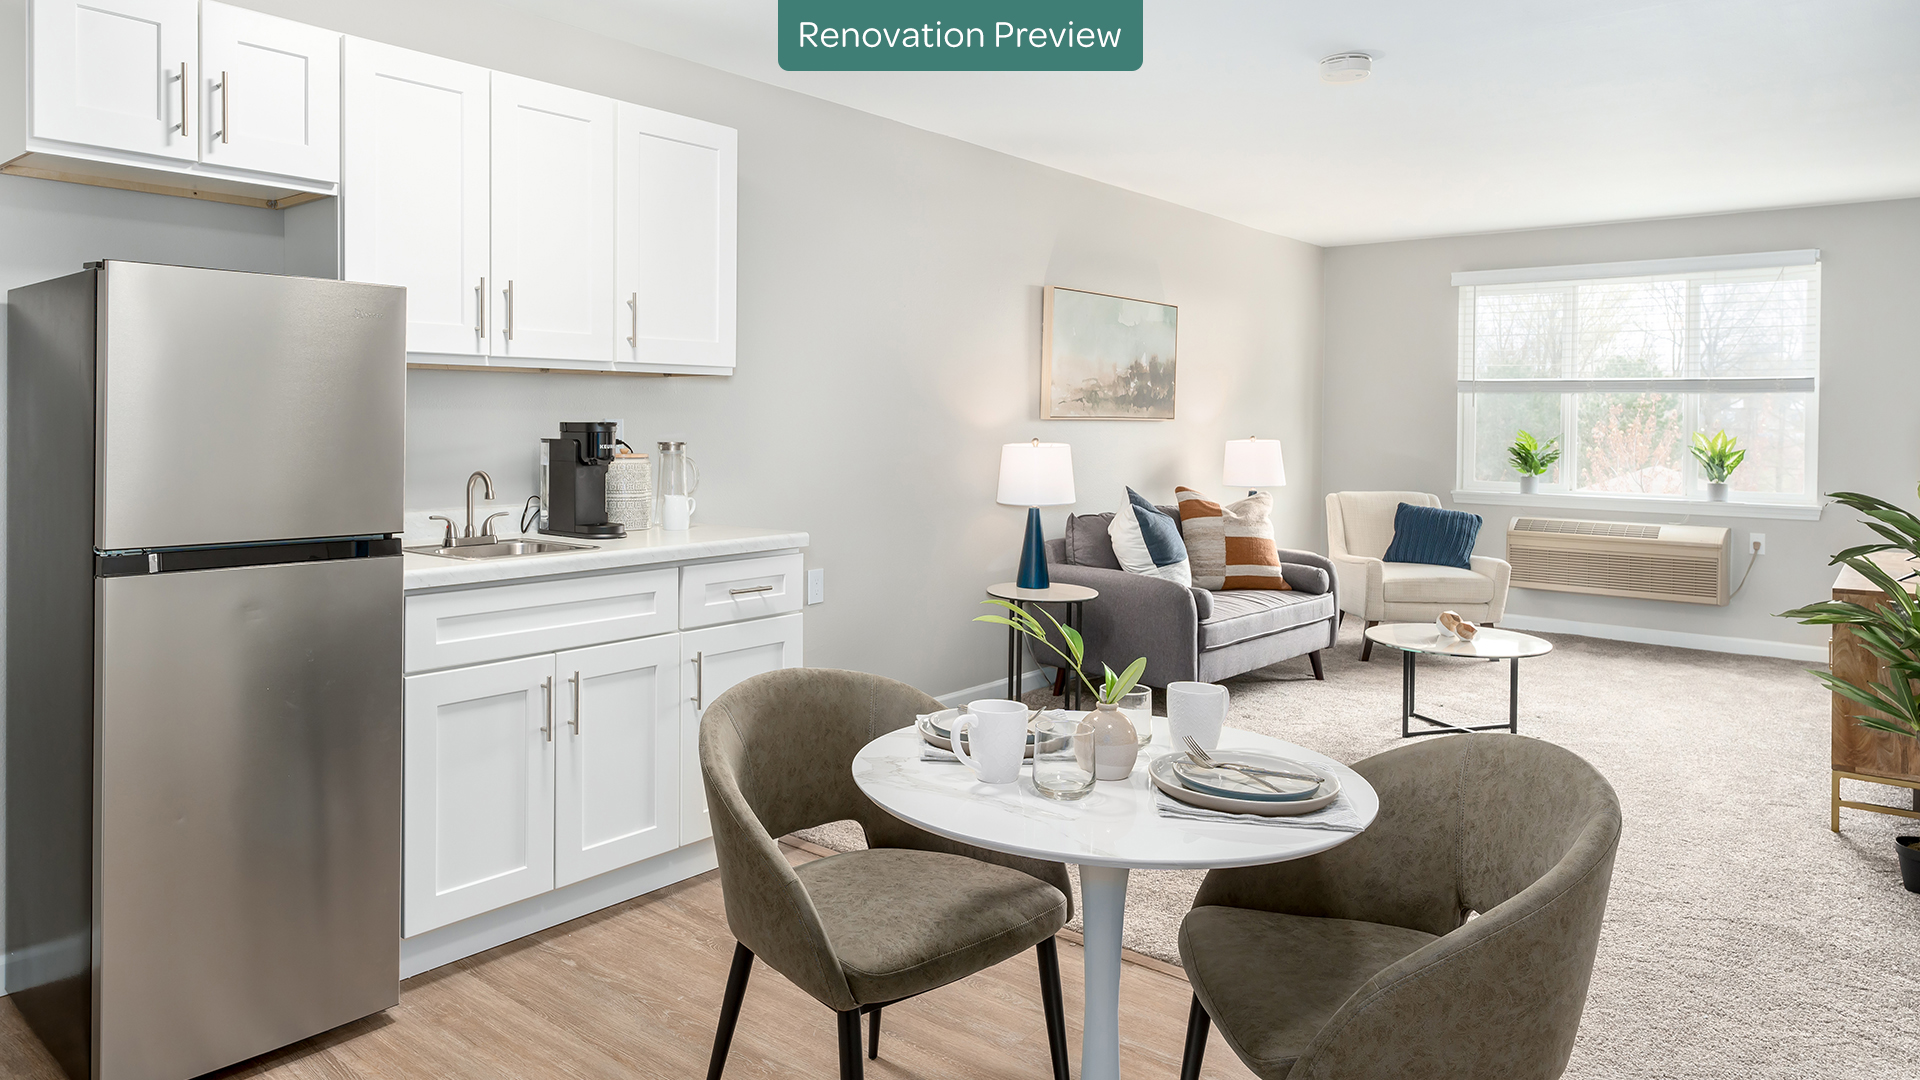 renovation preview for apartment kitchenette